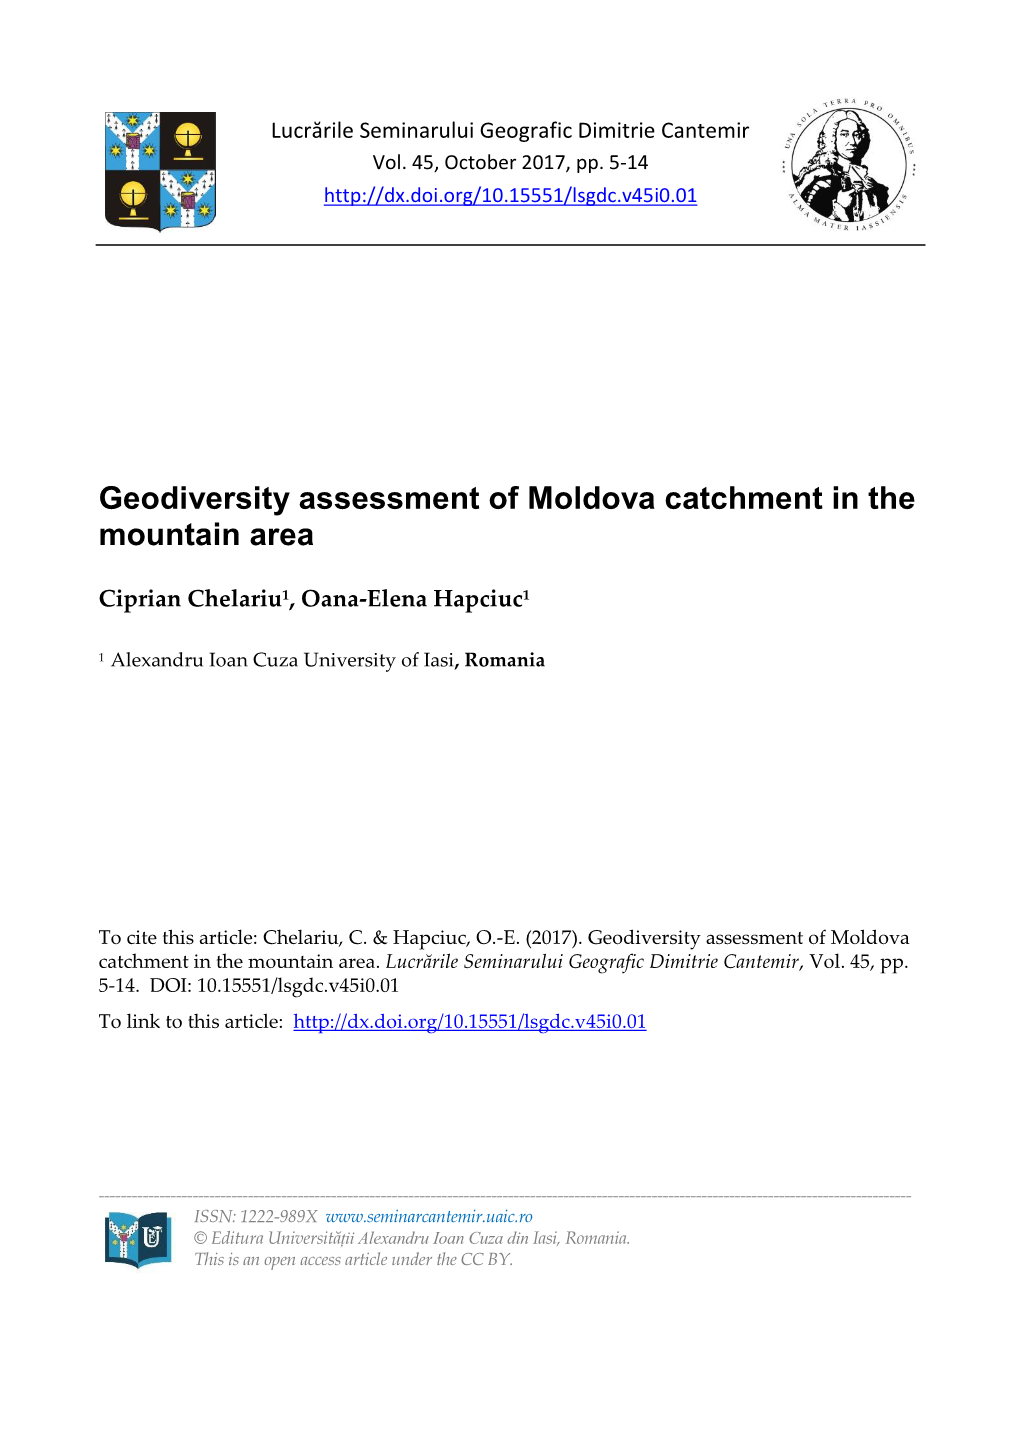 Geodiversity Assessment of Moldova Catchment in the Mountain Area